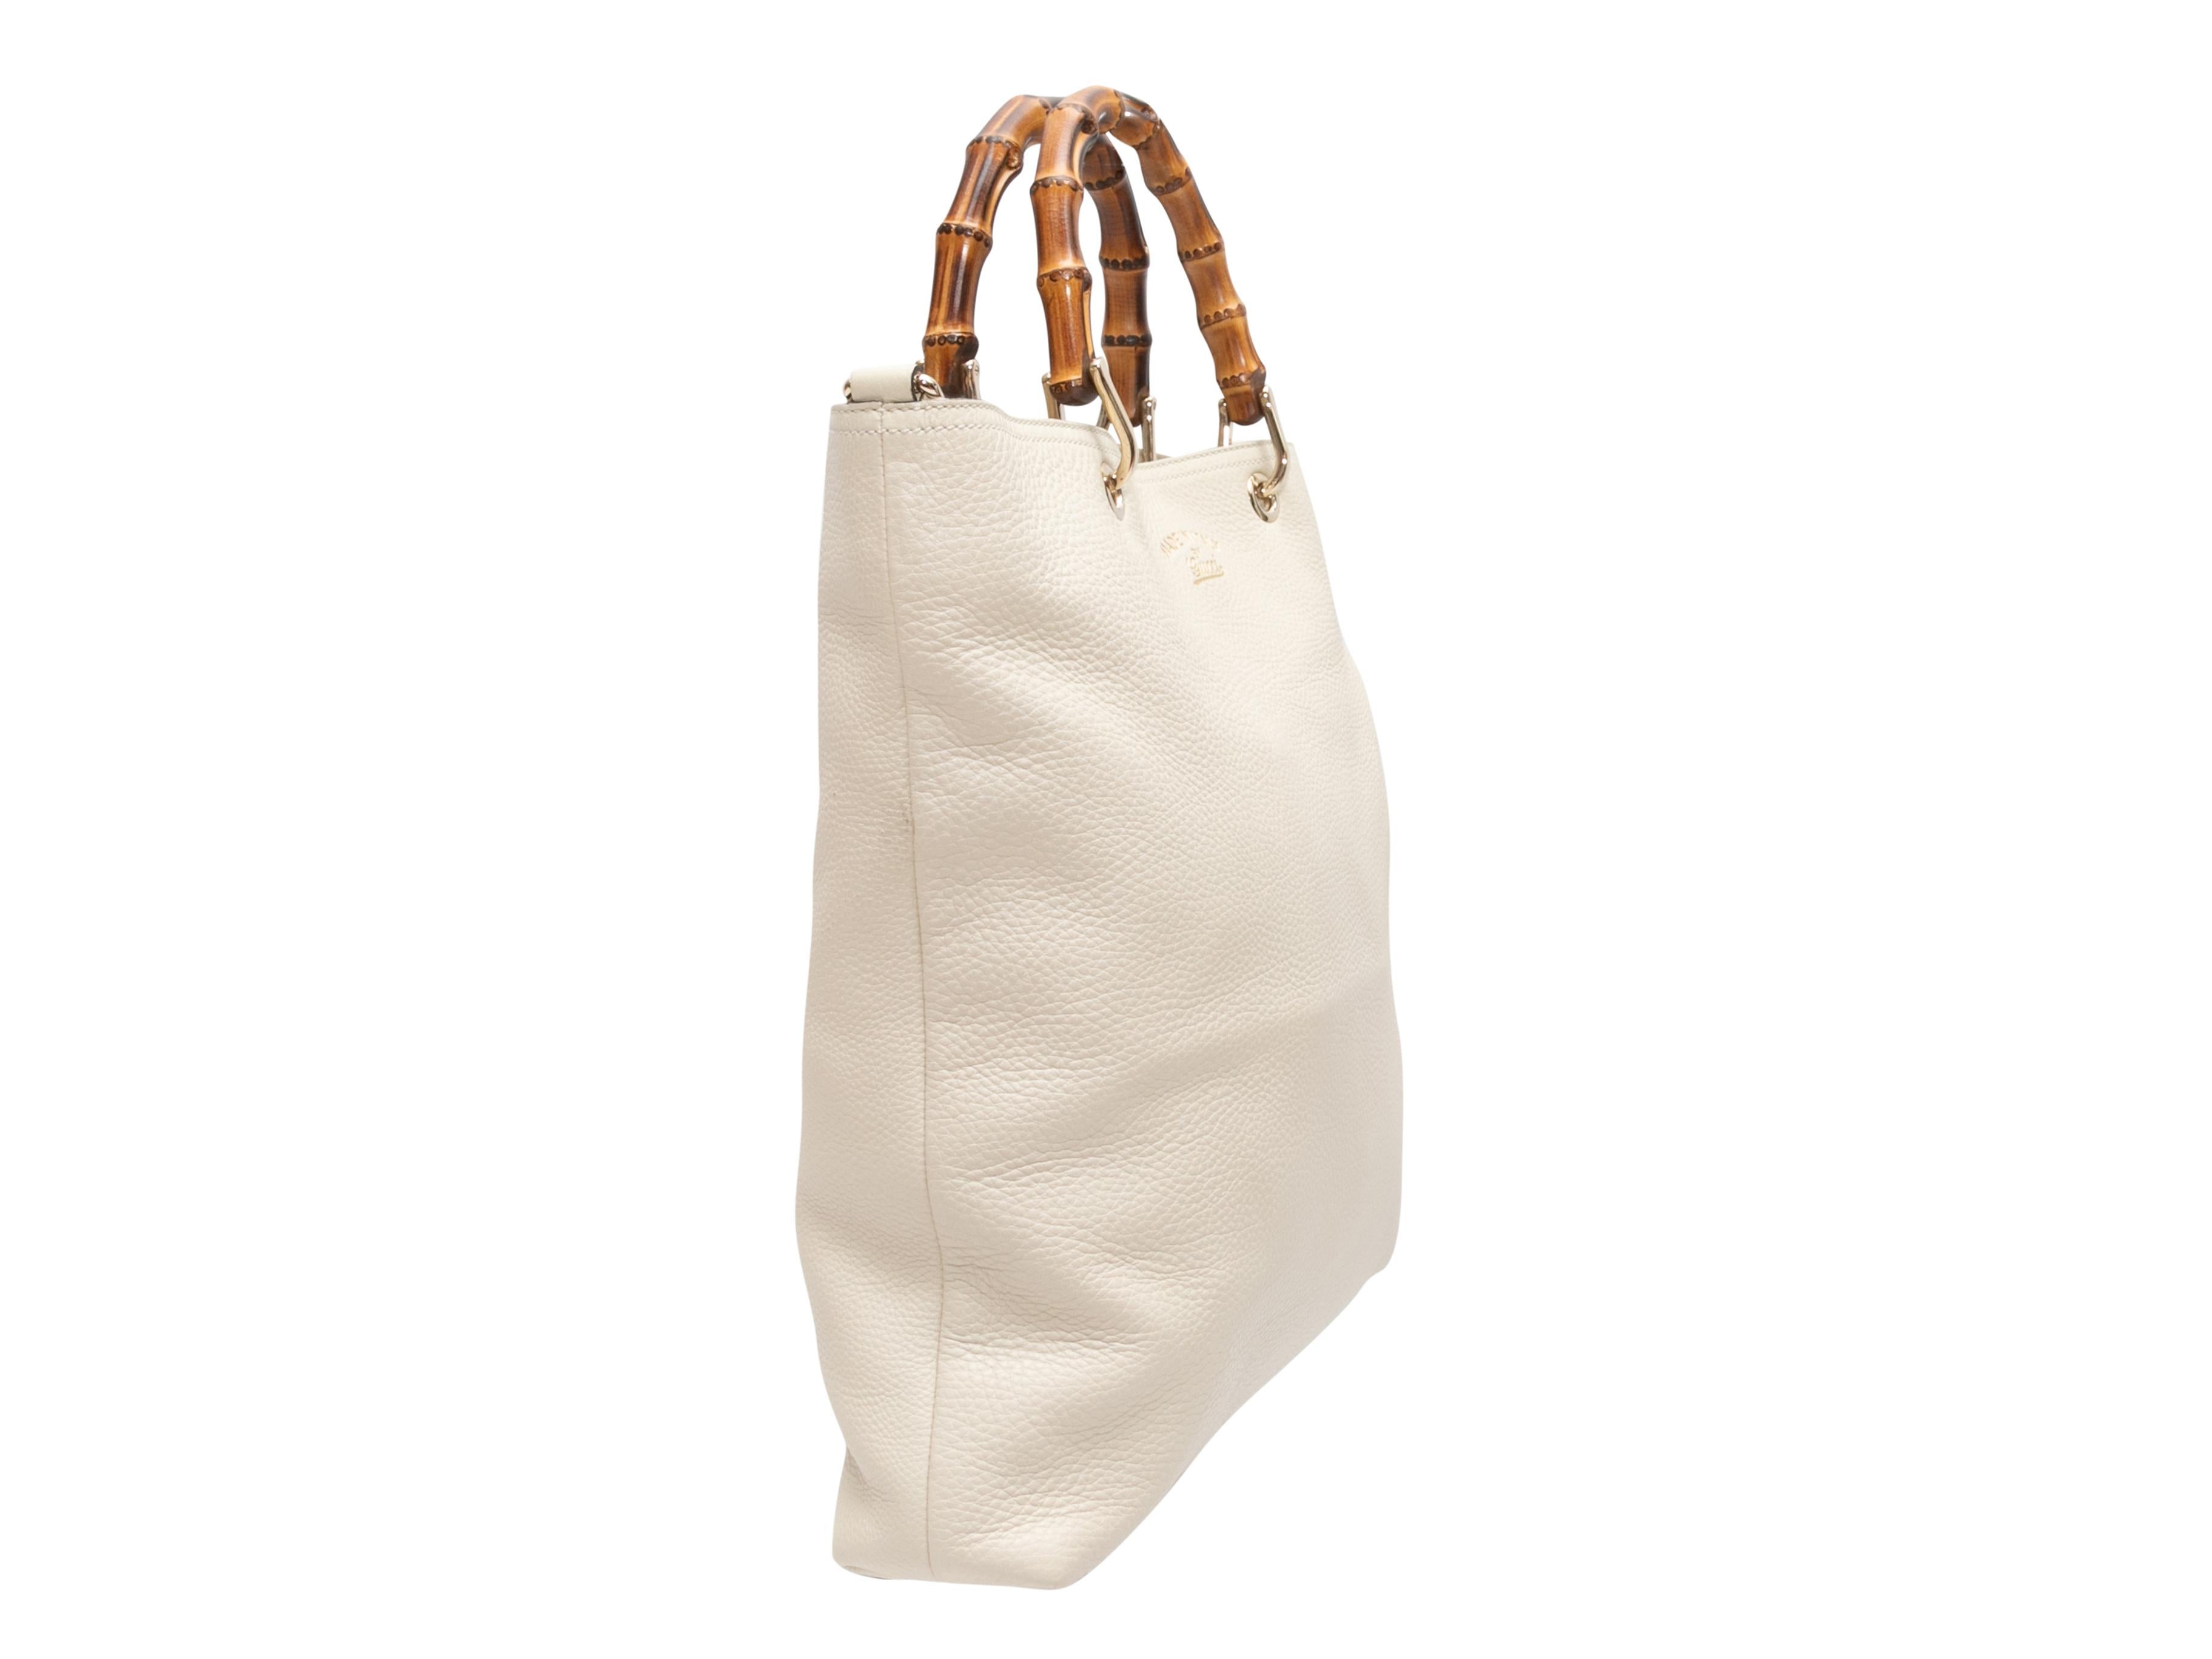 White Gucci Leather & Bamboo Shopping Tote. This shopping tote features a leather body, gold-tone hardware, dual bamboo top handles, and a magnetic top closure. 16